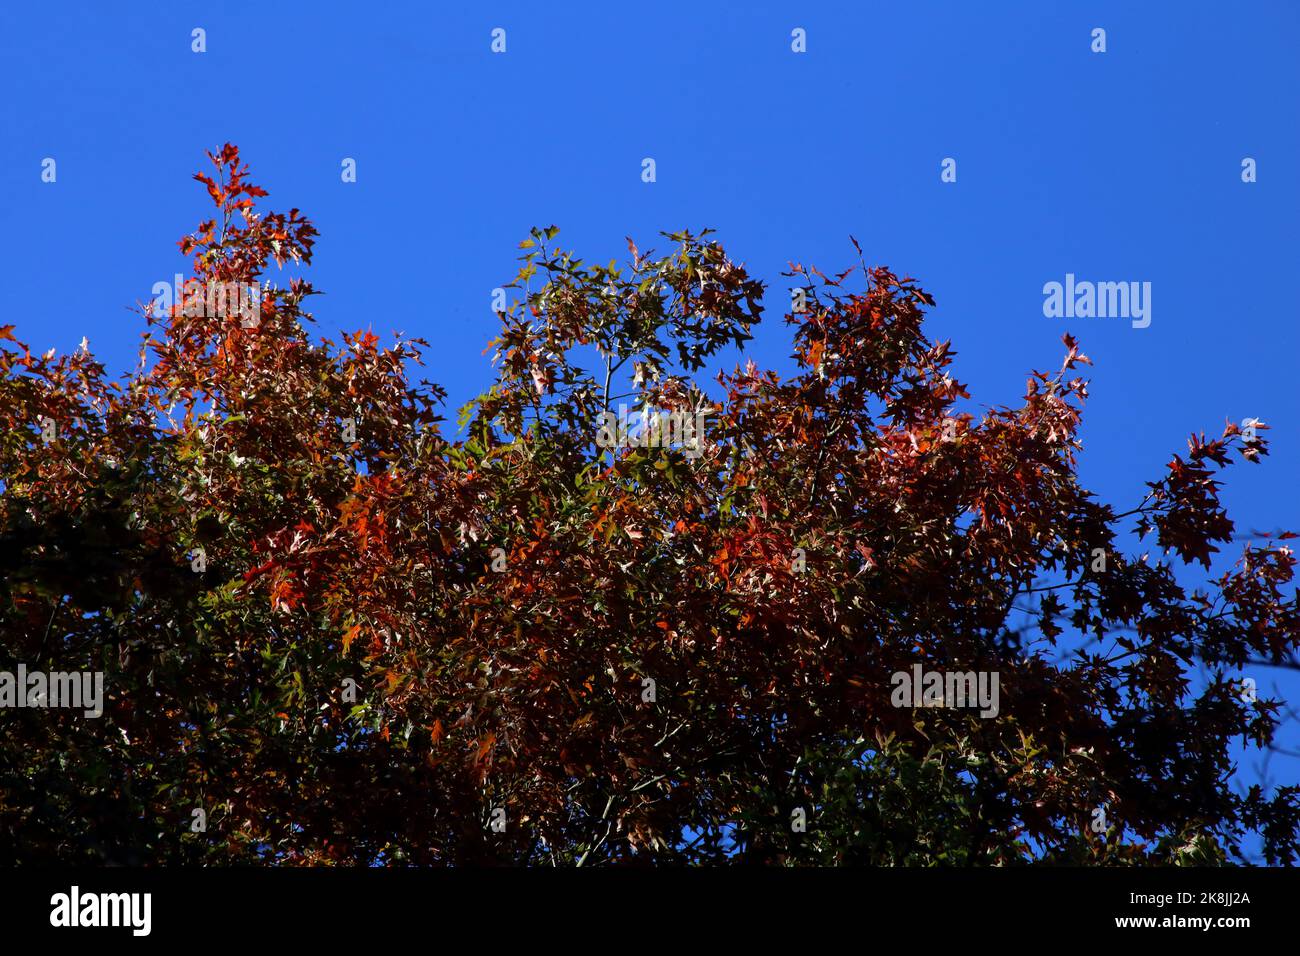 Red tinge of Autumn against a vivid blue sky. Stock Photo